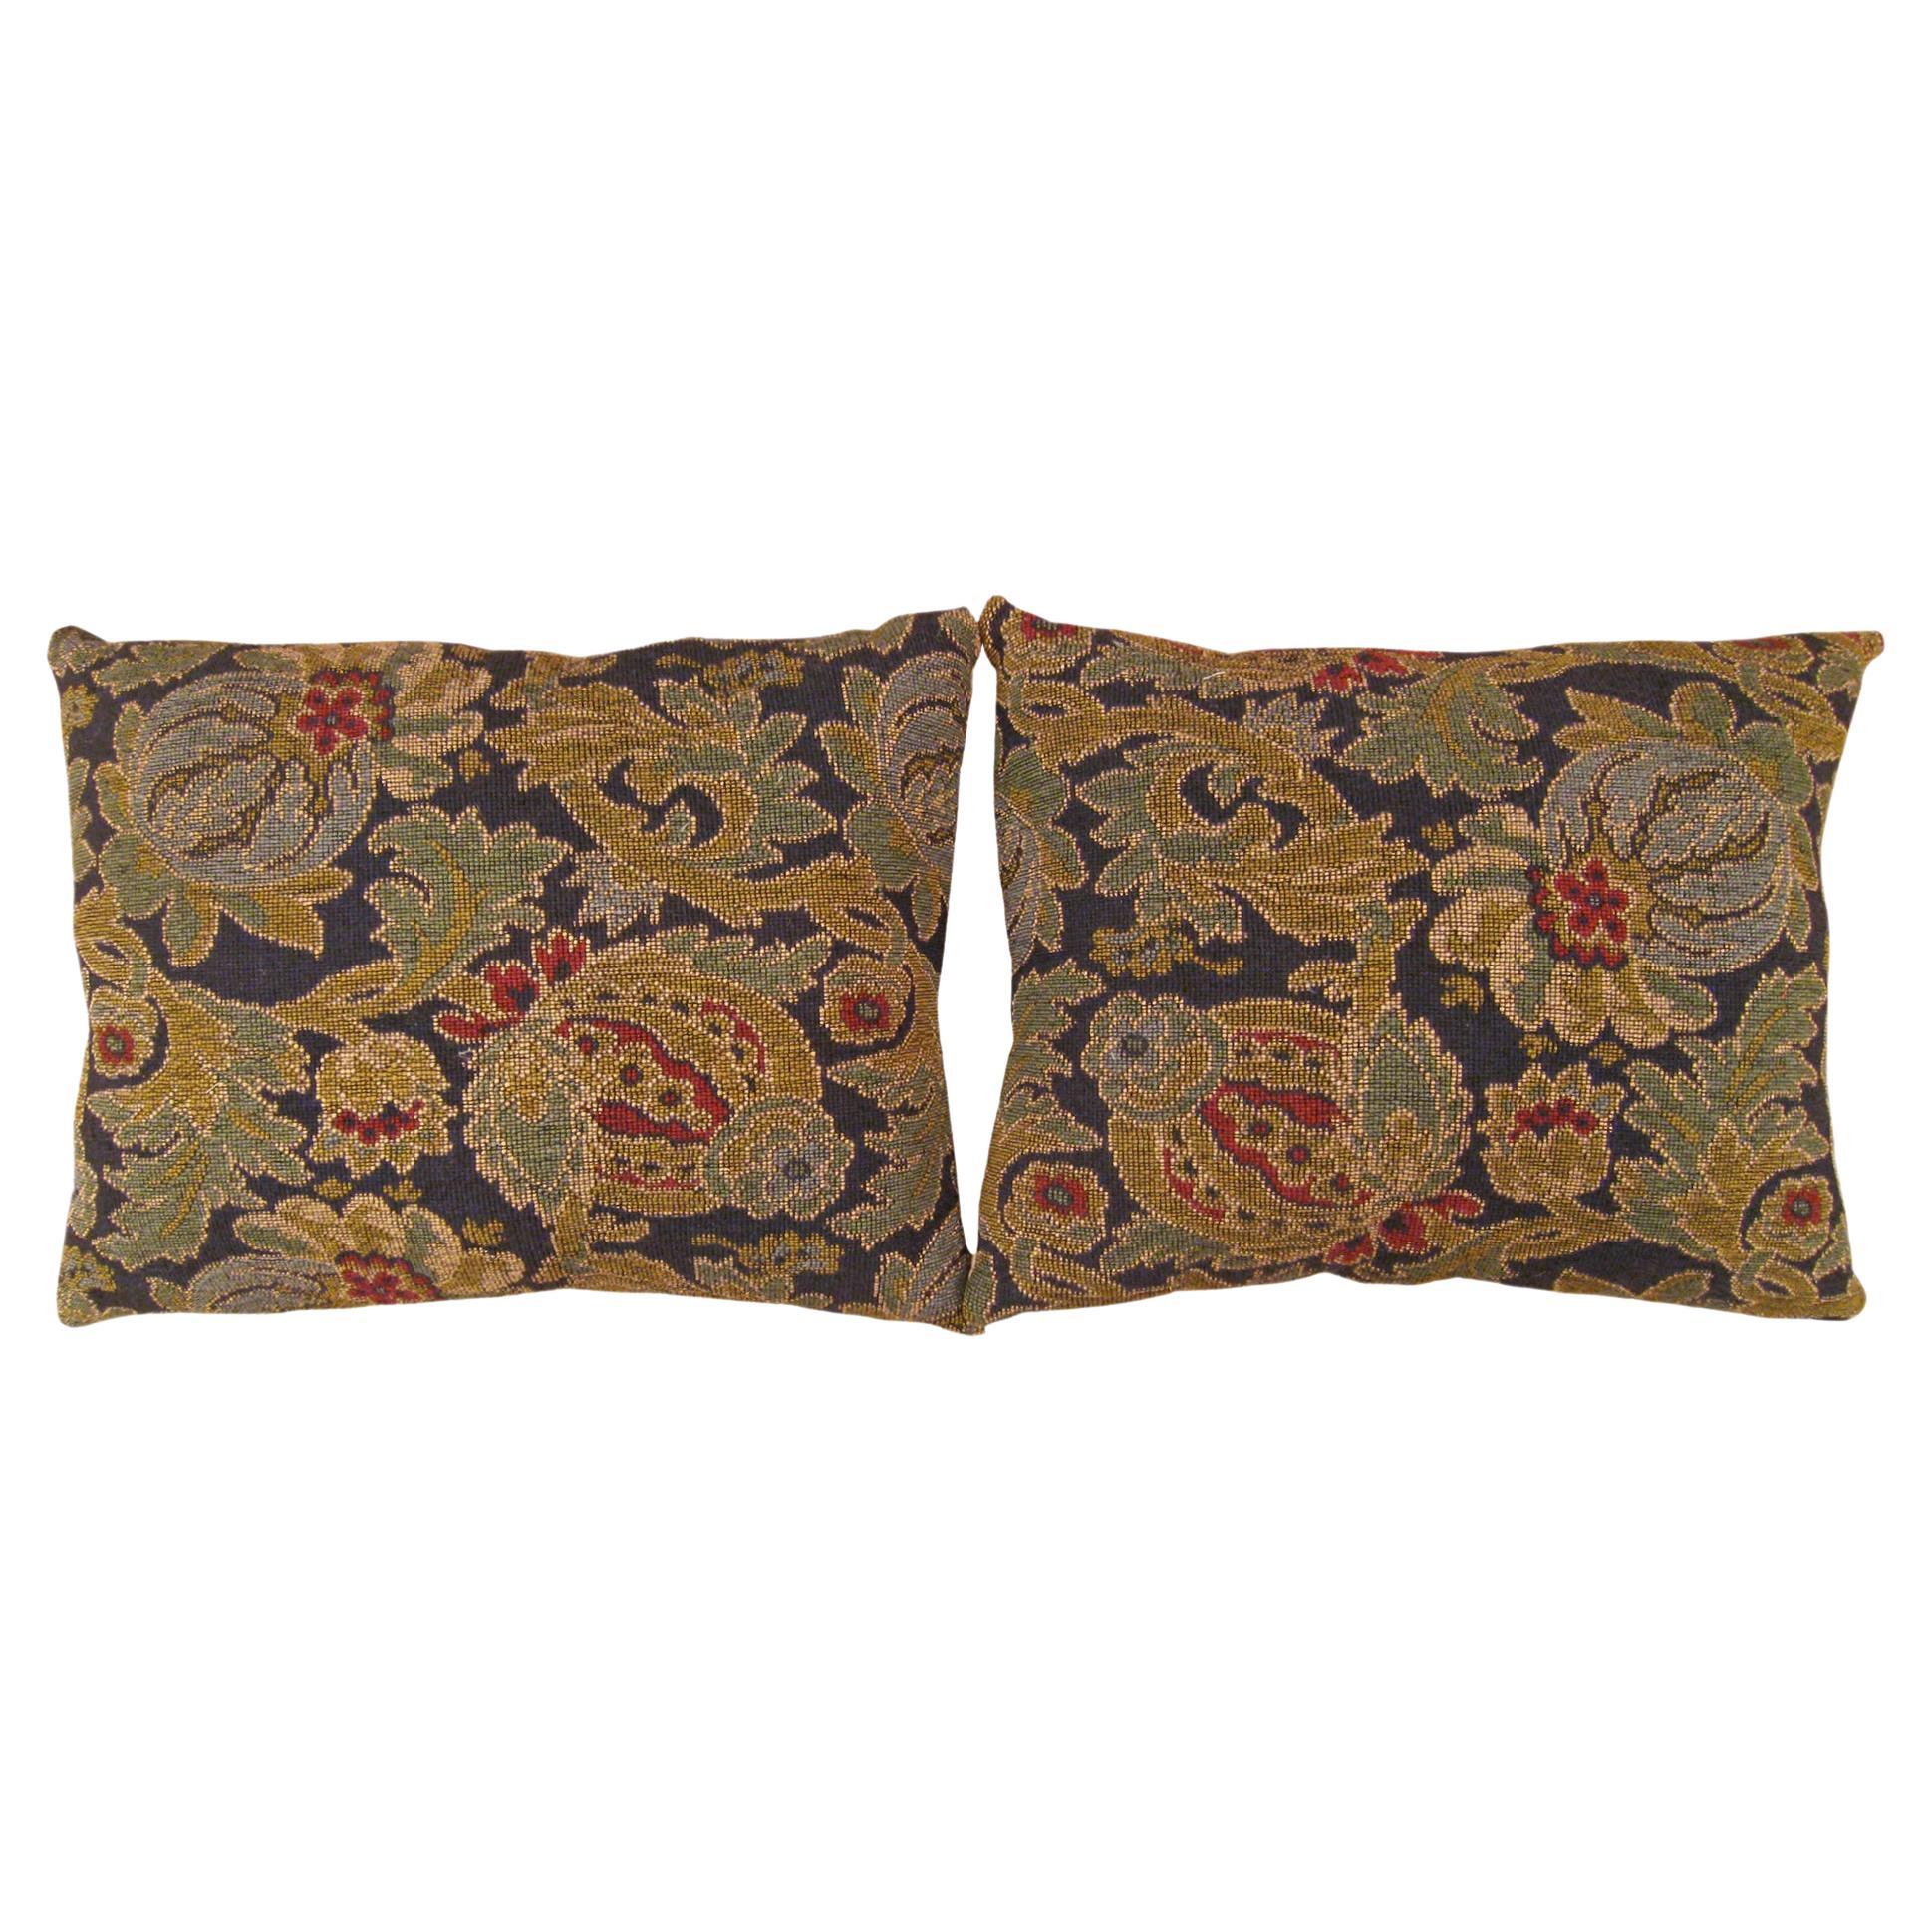 Pair of Decorative Antique Jacquard Tapestry Pillows with Floral Elements For Sale